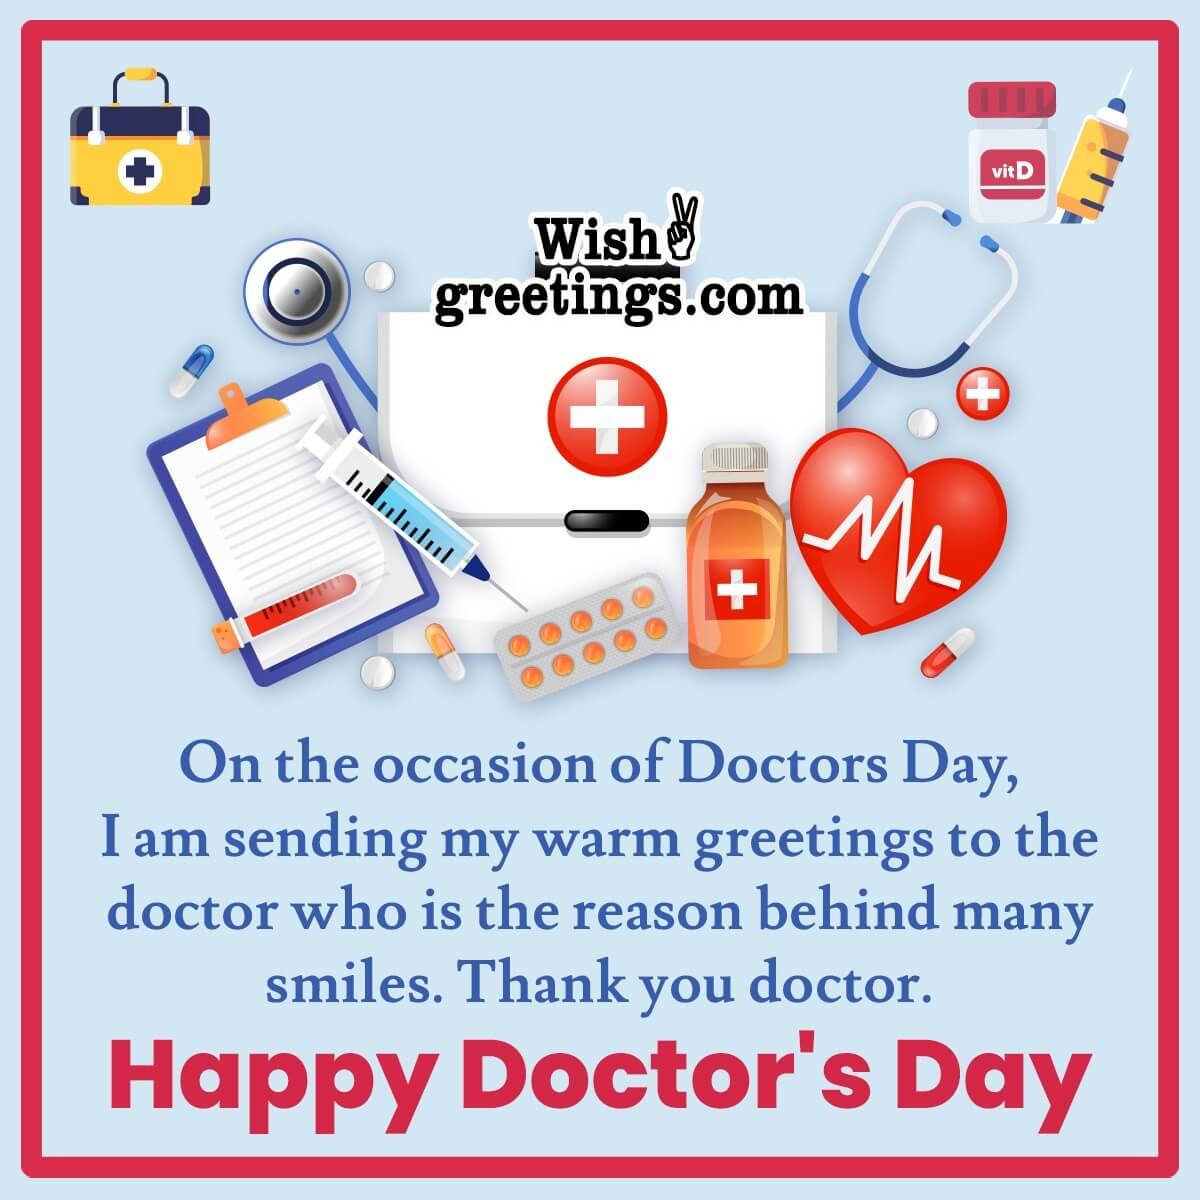 National Doctor’s Day Message